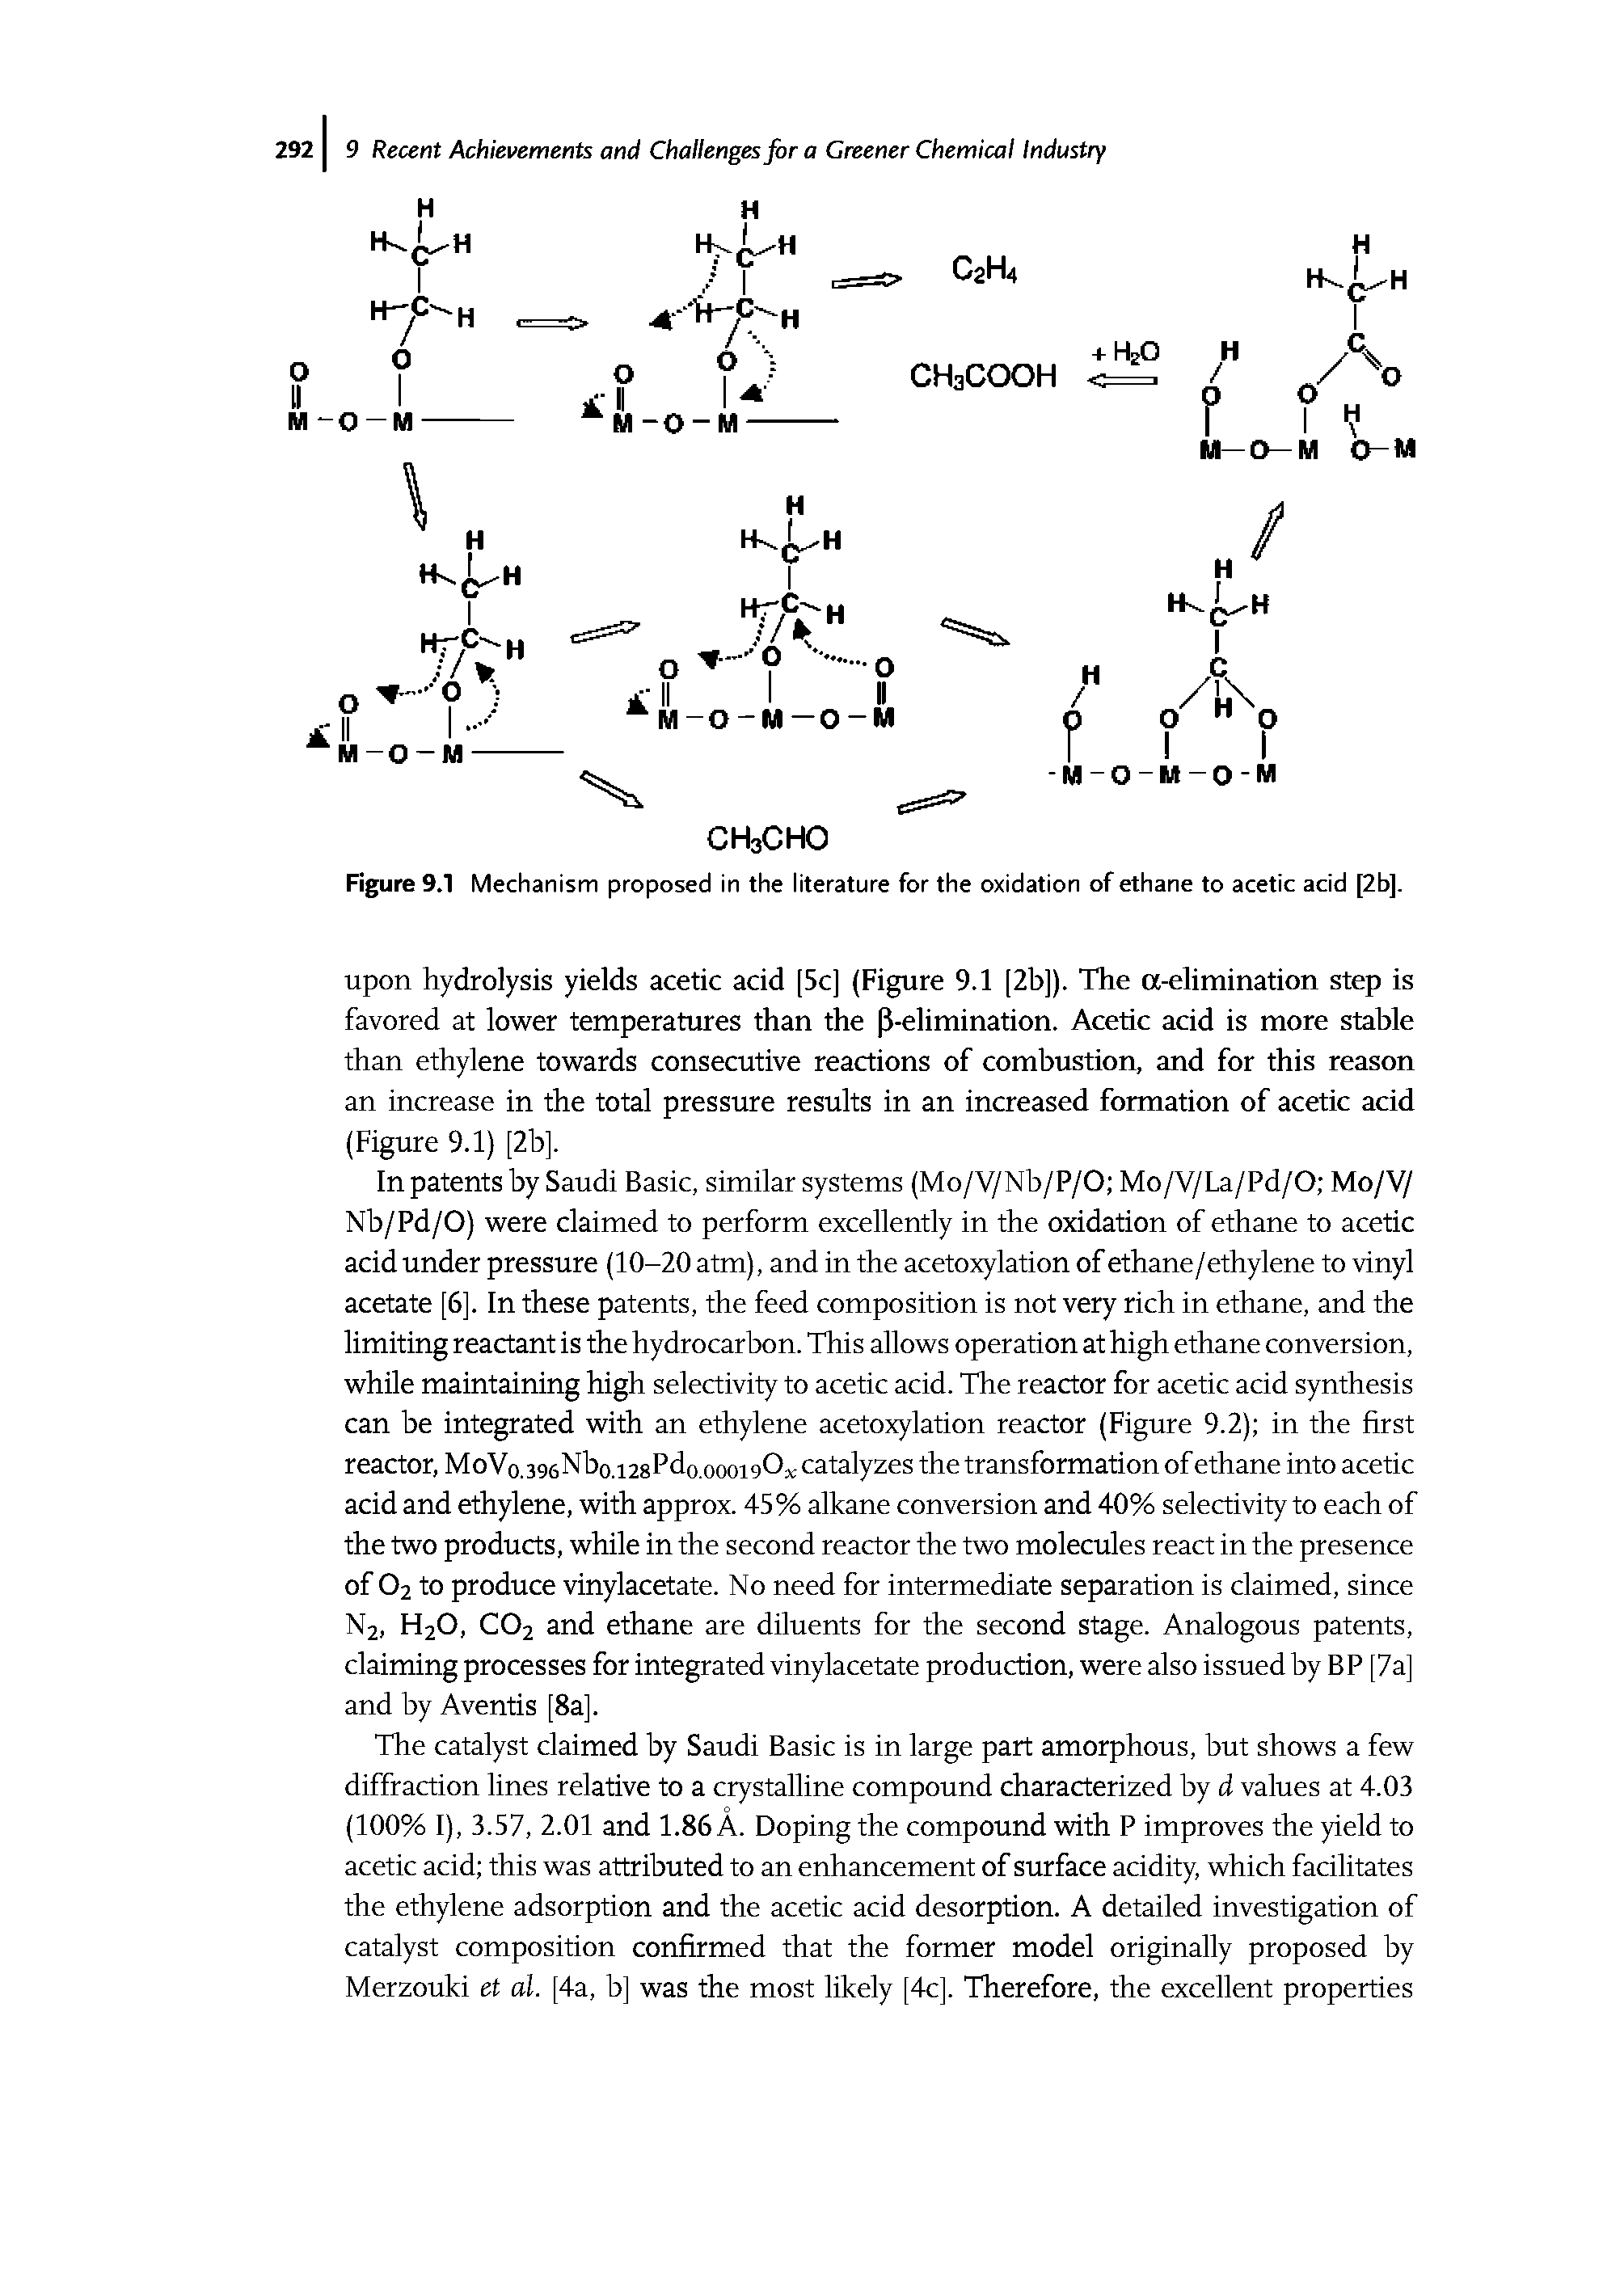 Figure 9.1 Mechanism proposed in the literature for the oxidation of ethane to acetic acid pb].